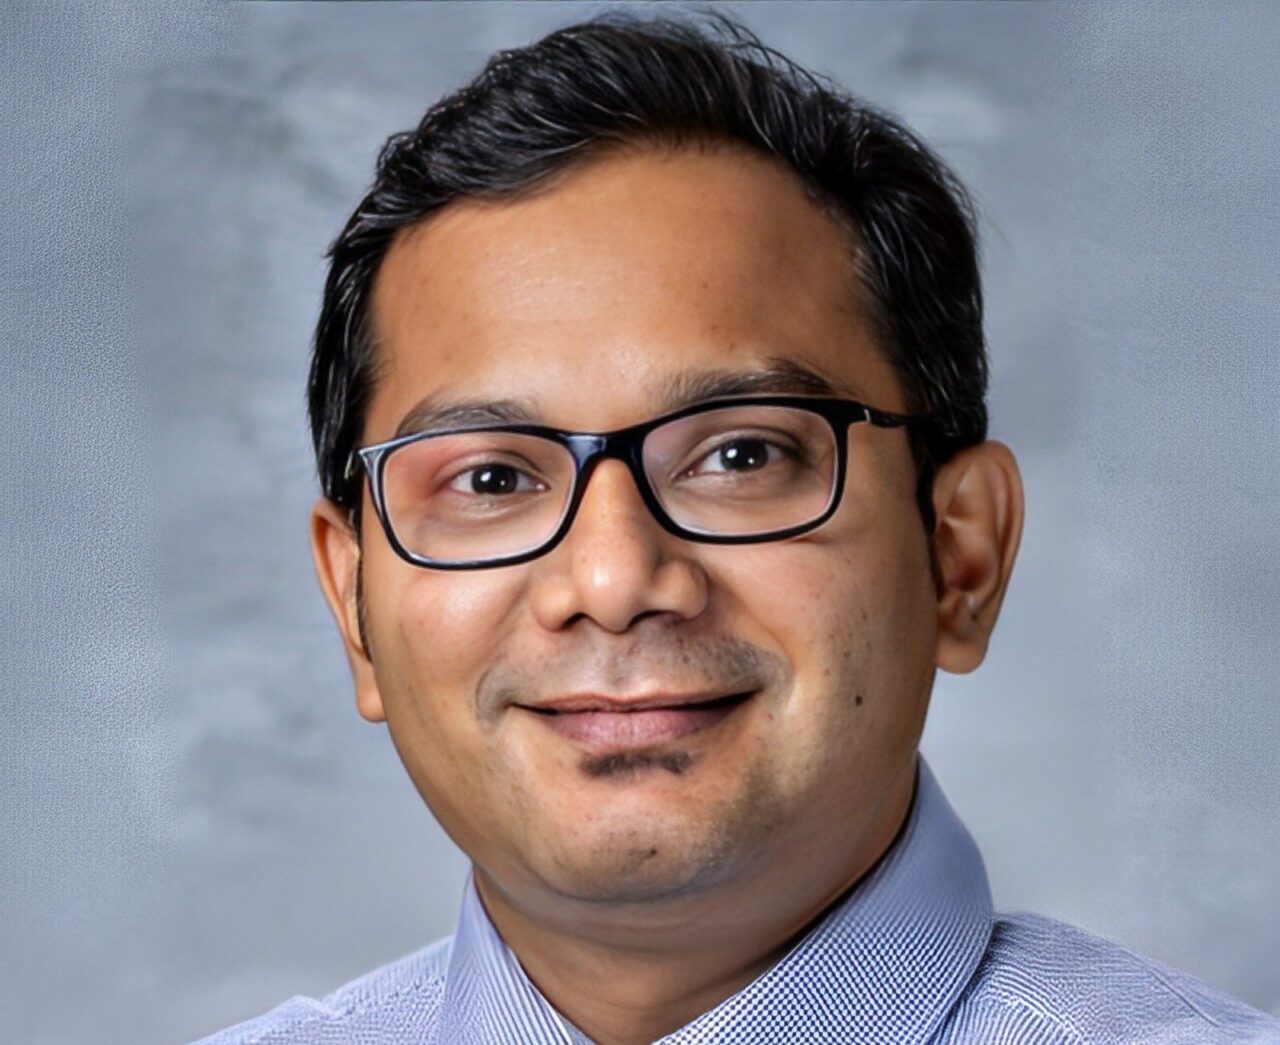 Jayastu Senapati: I have joined as Asst Prof in the Dept of Leukemia at MD Anderson Cancer Center, Houston